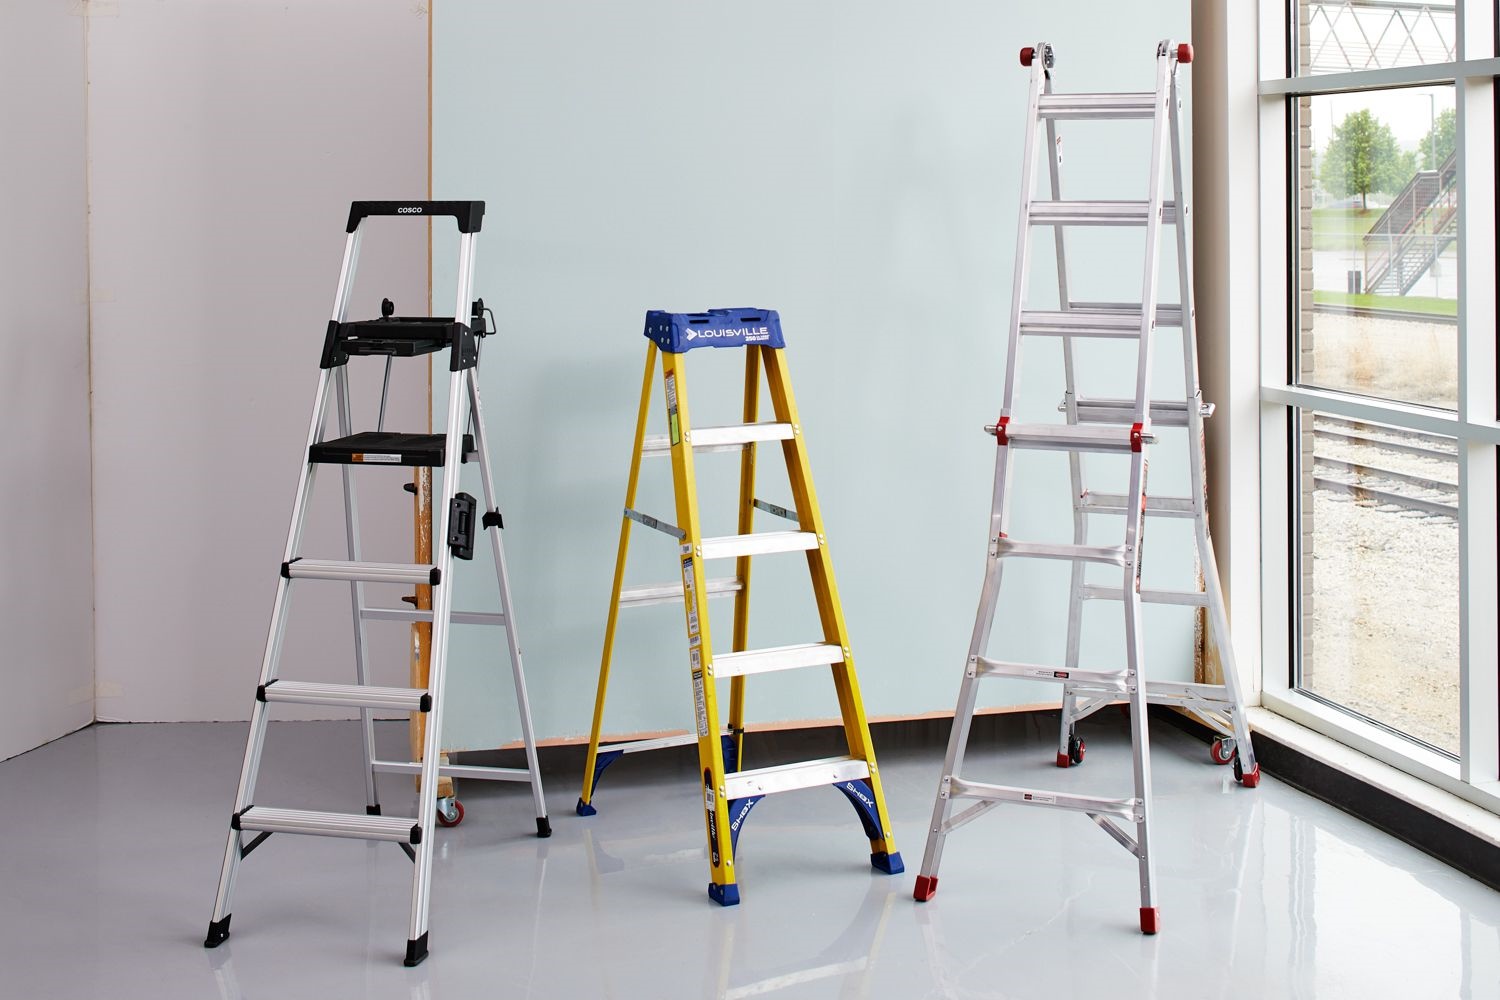 What Is The Relationship Between Ladder Length And Weight Capacity